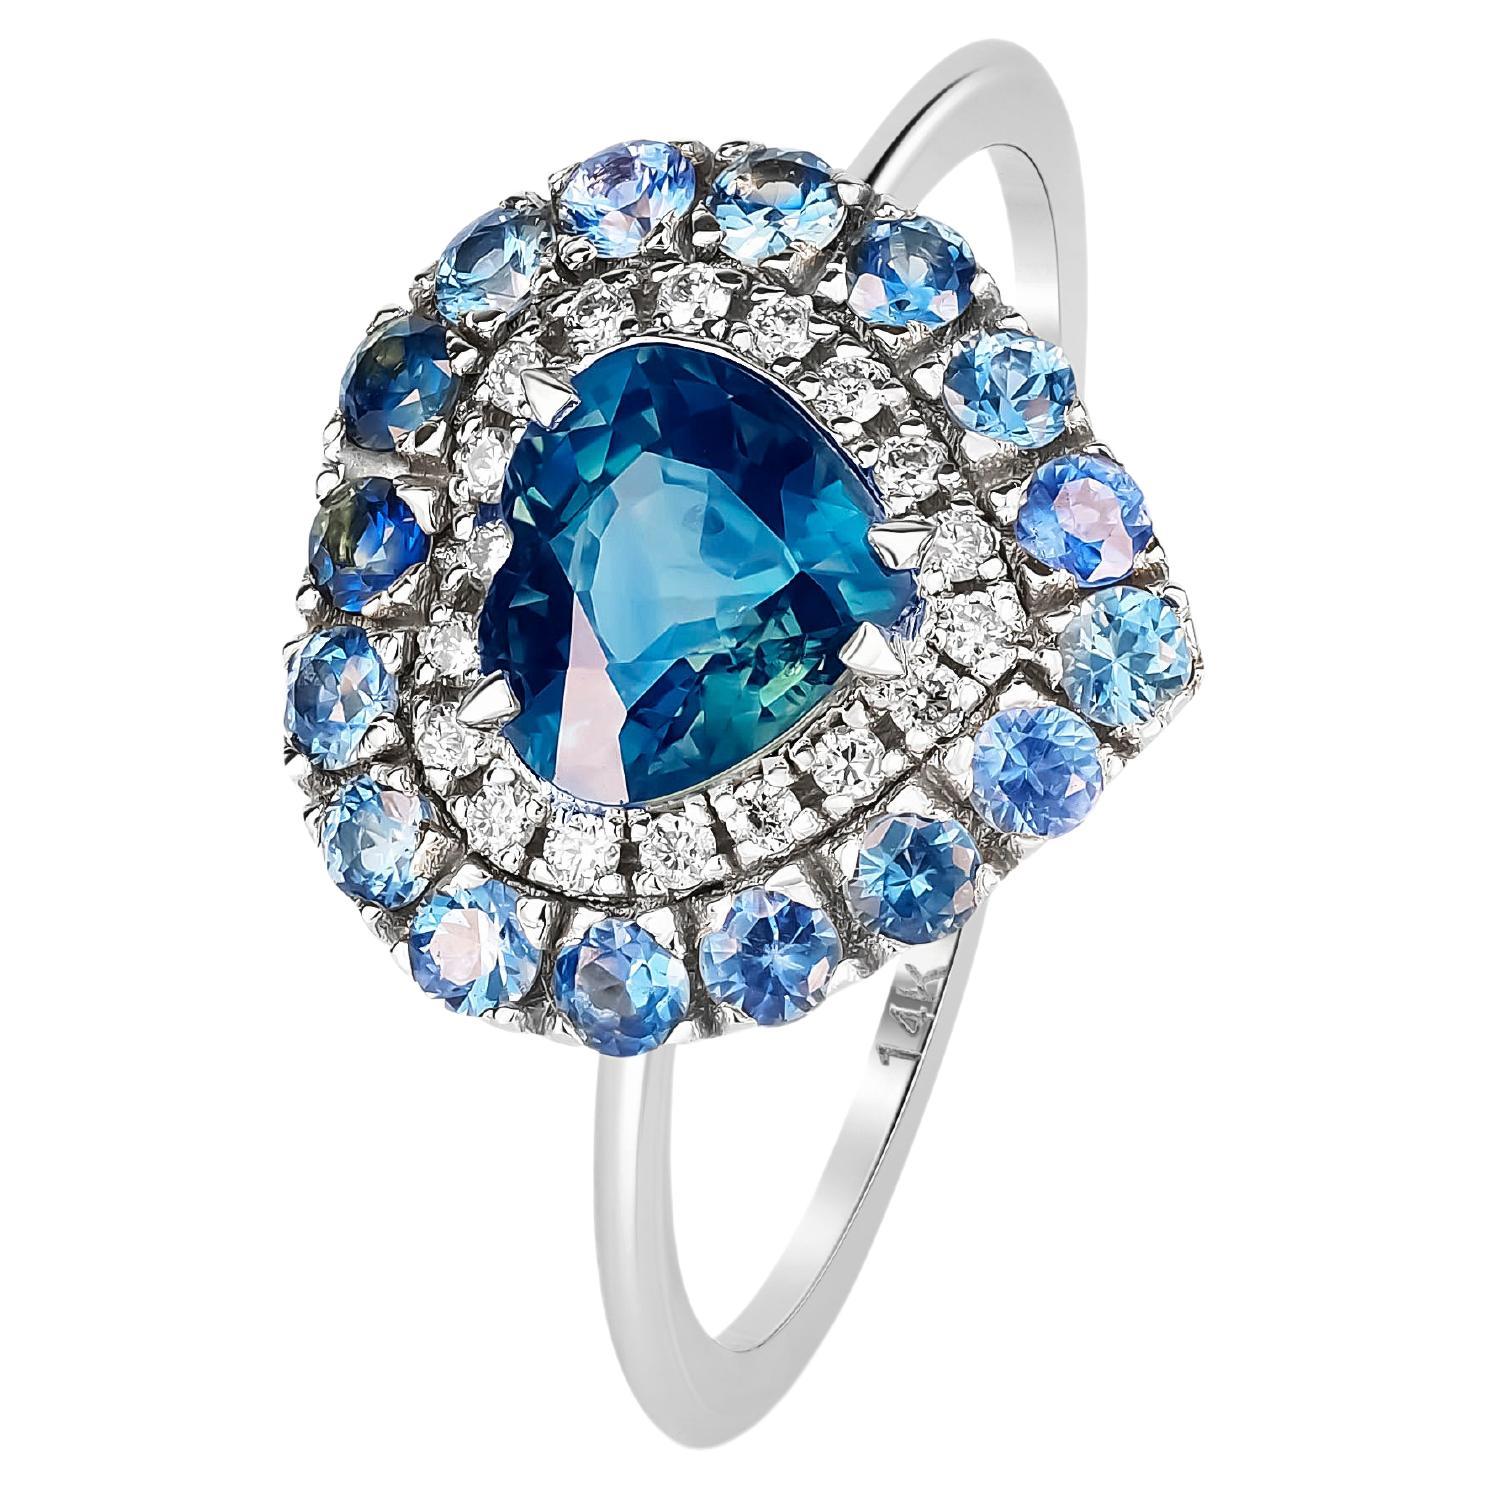 Sapphire Engagement Ring in 14k White Gold, Blue Sapphire and Diamonds ...